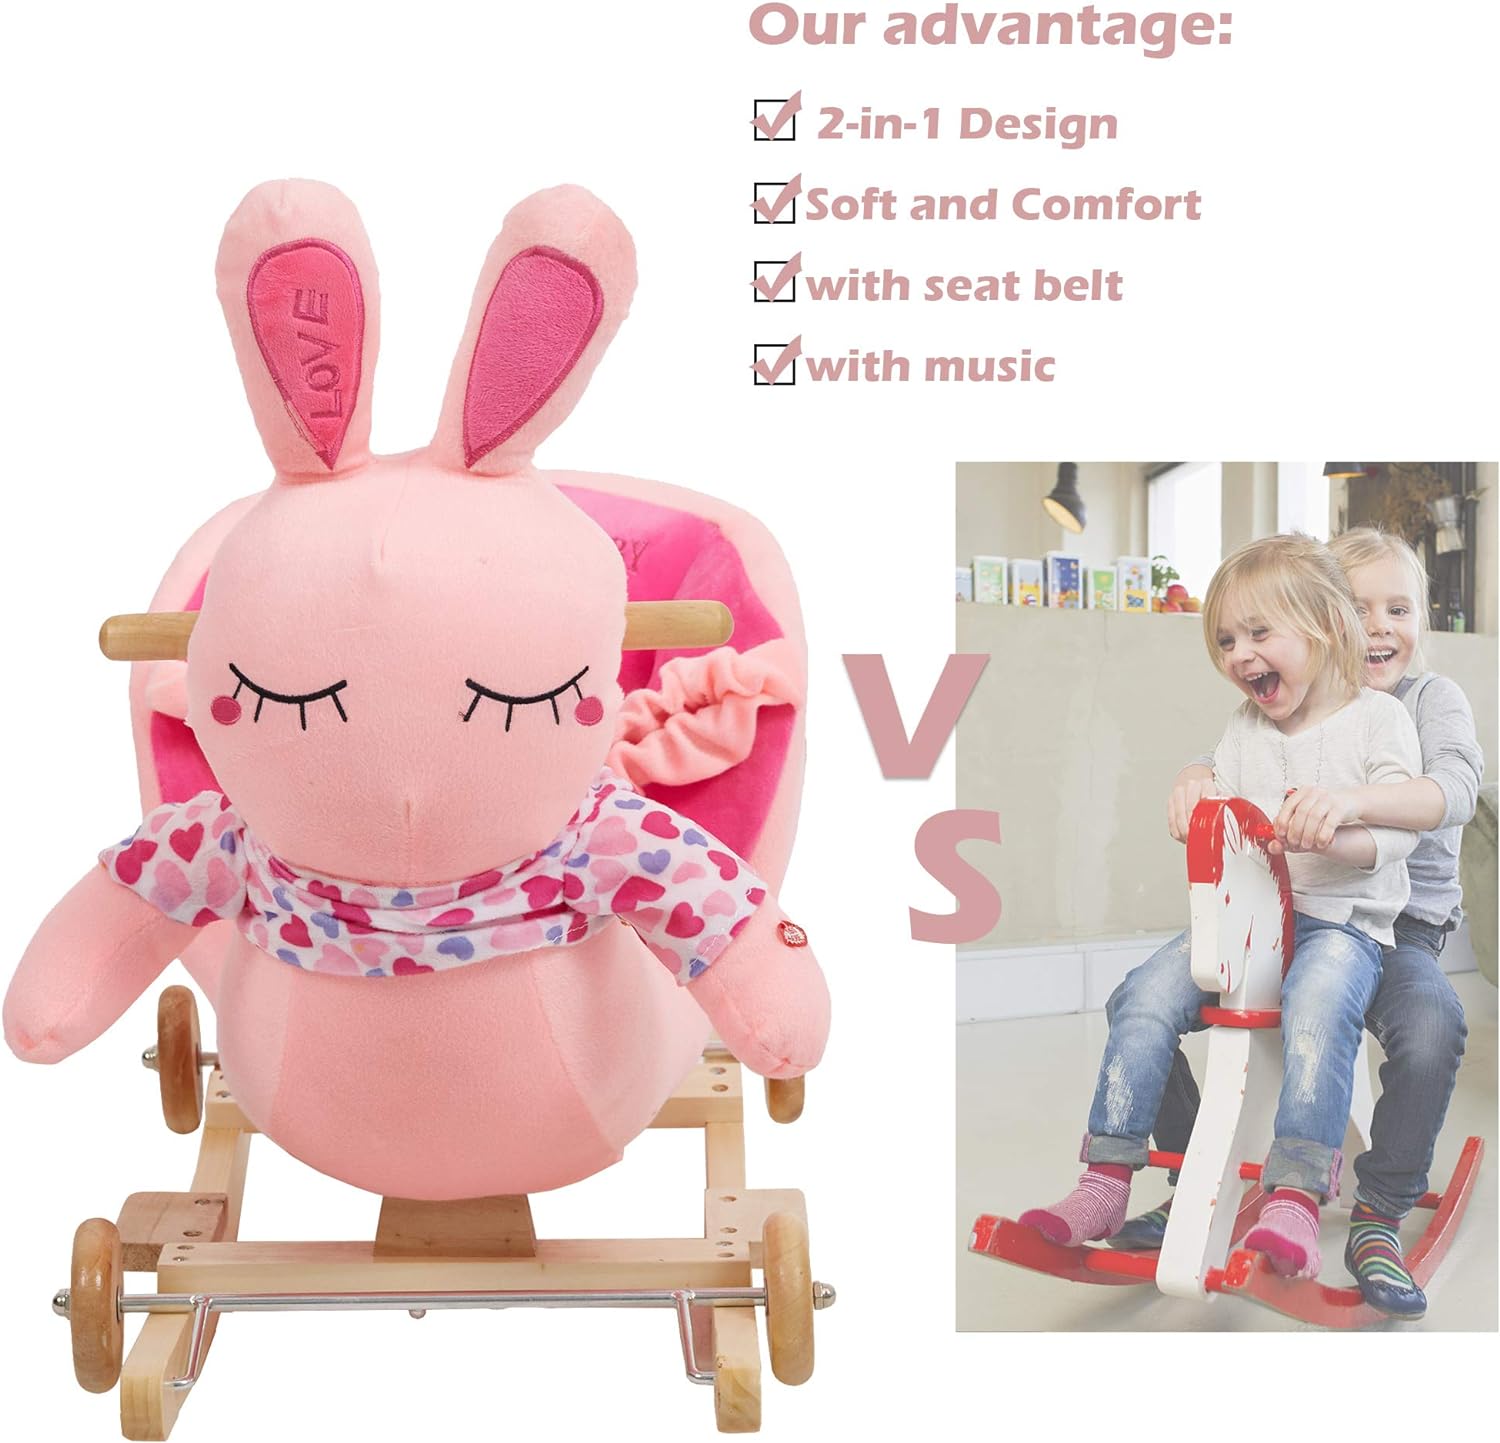 2-in-1 Ride-on Wooden Plush Rocking Horse Chair with Music for Baby Kids Toddlers, Pink Rabbit